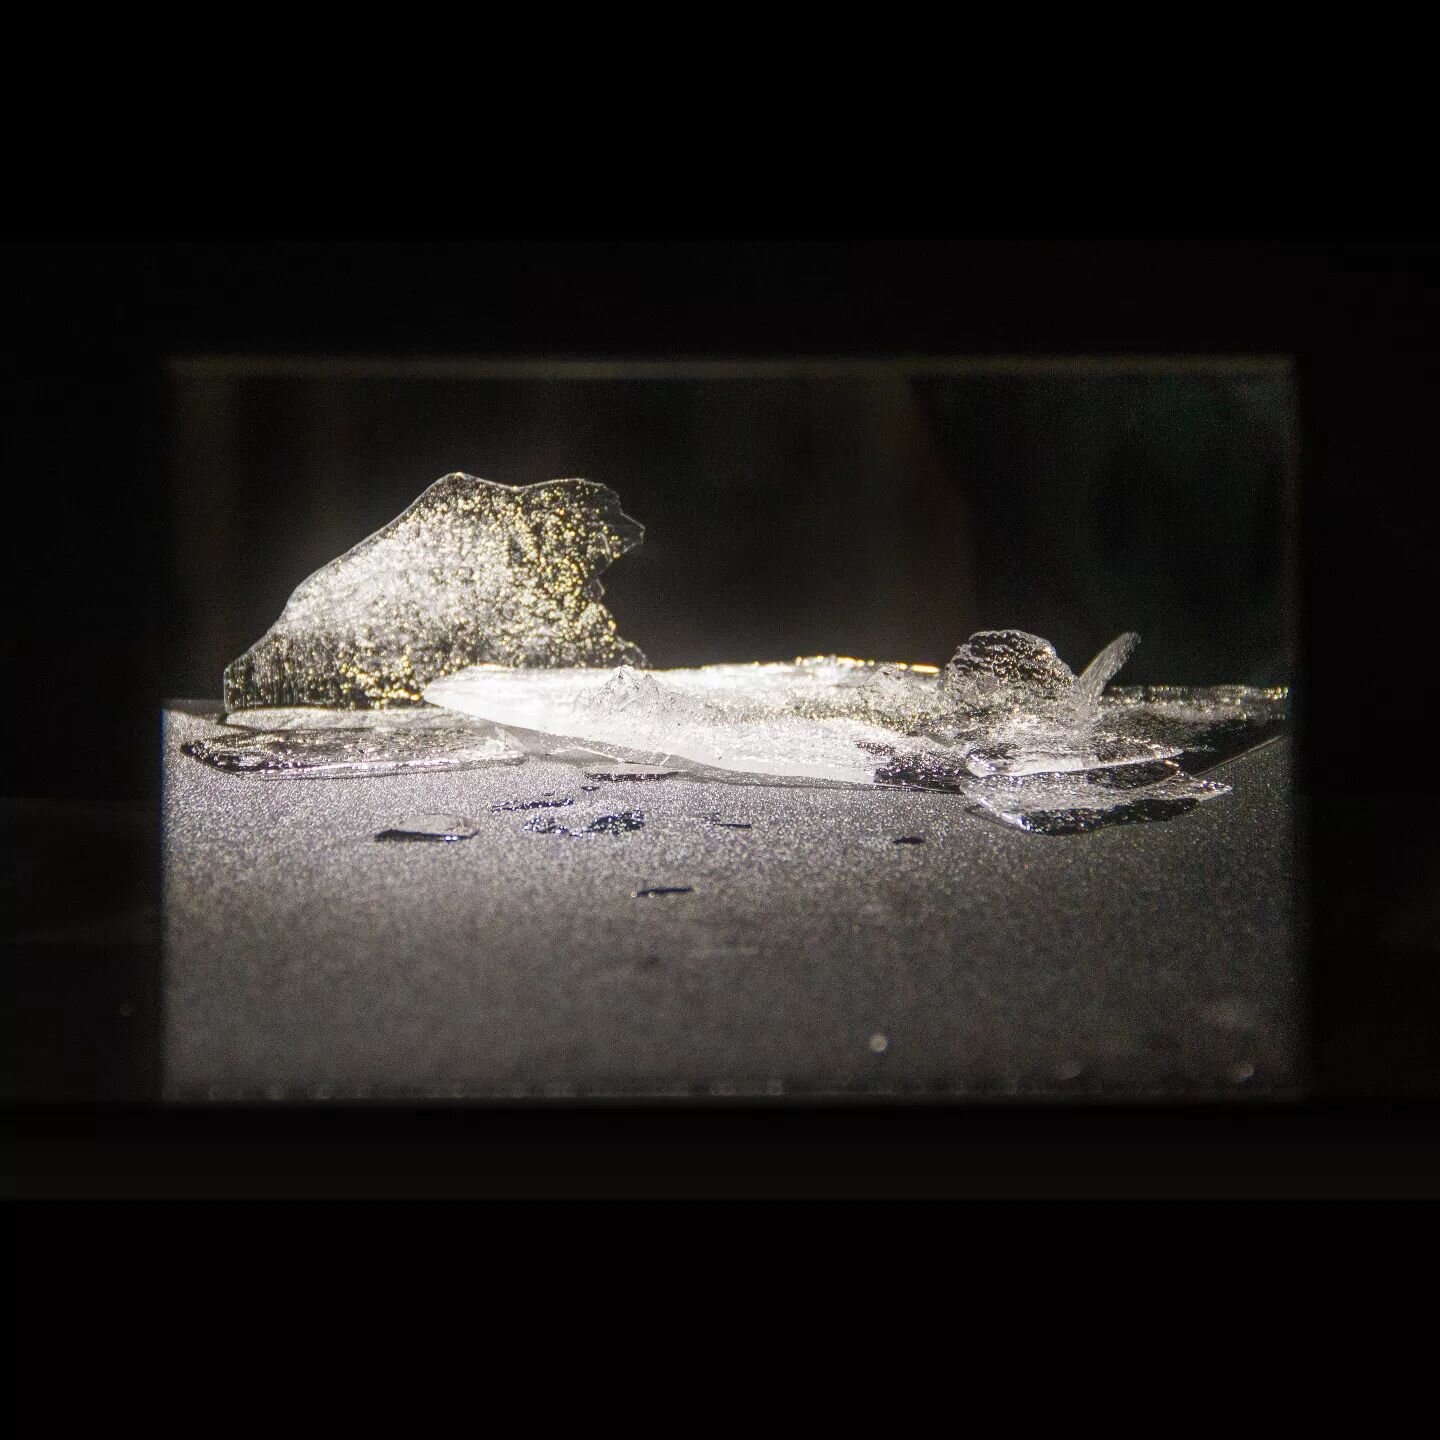 Scrying scene 1
.
.
#leannebellgonczarow #WIP #light #ice #reflection #obsidian #scrying #materialimagining
#contemporaryphotography #postphotography #digitalmateriality #artresearch #contemporaryart #kunst #climatecrisis #meltingice #newmaterialism 